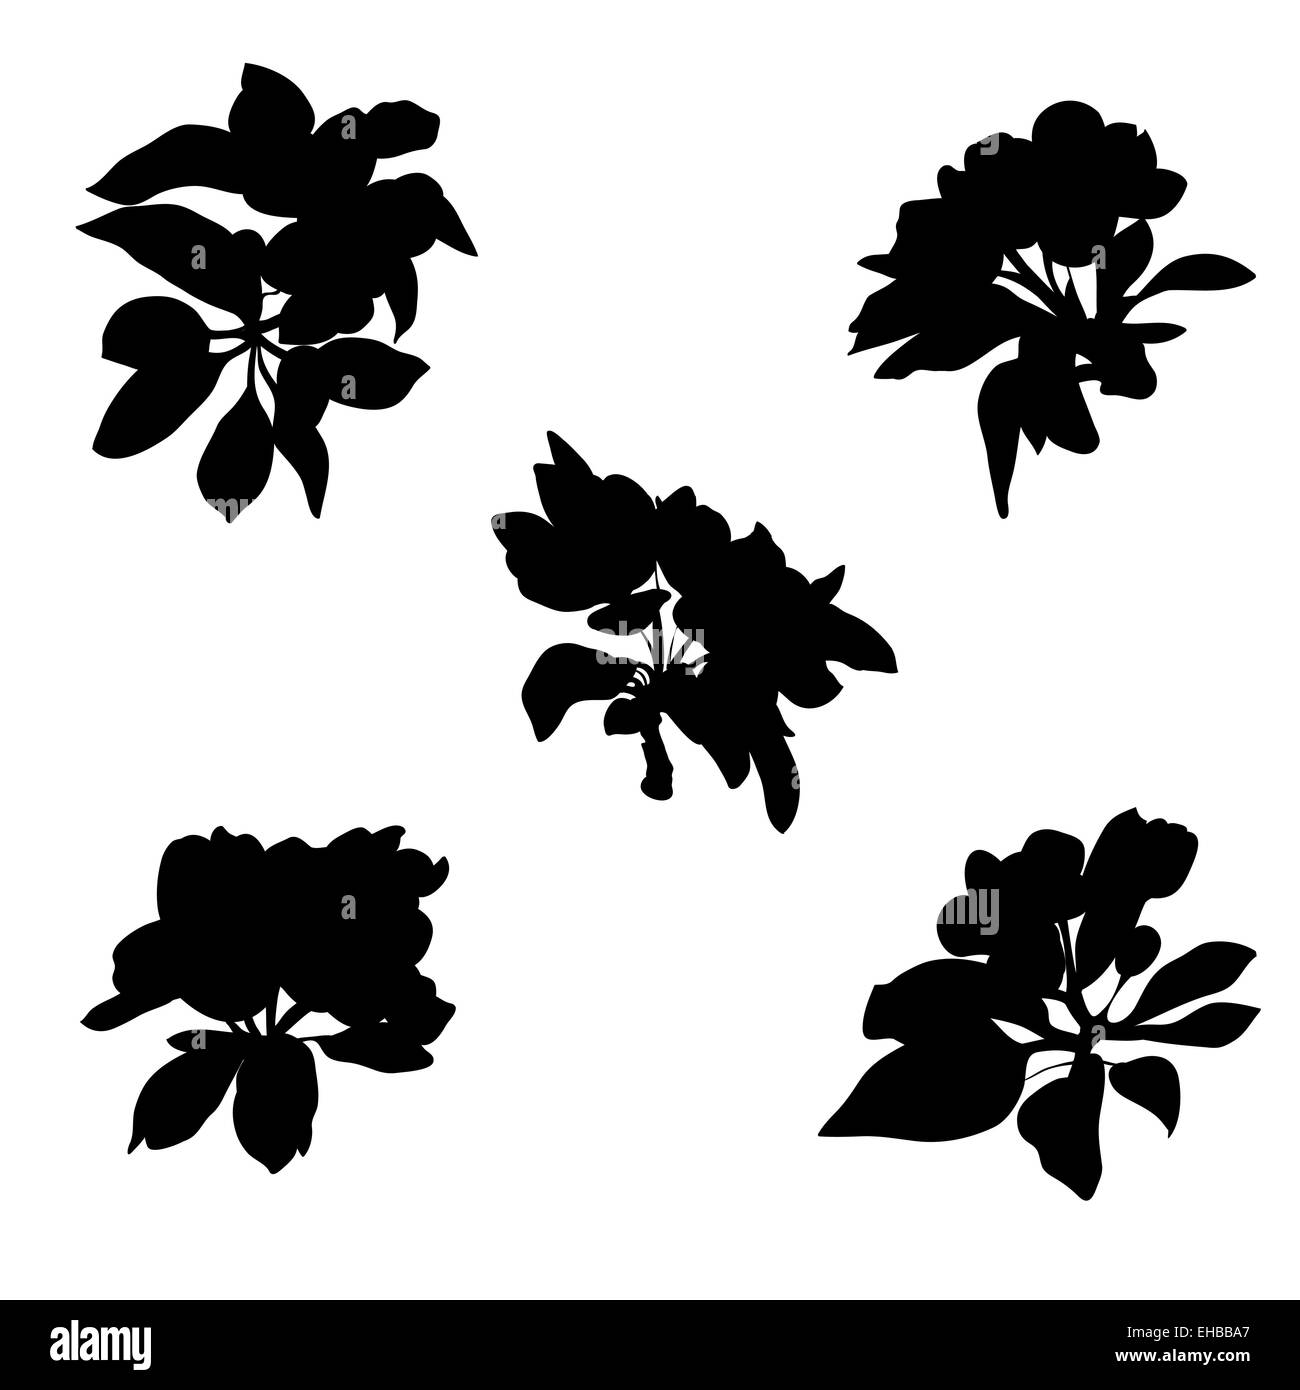 apple flowers silhouettes Stock Photo